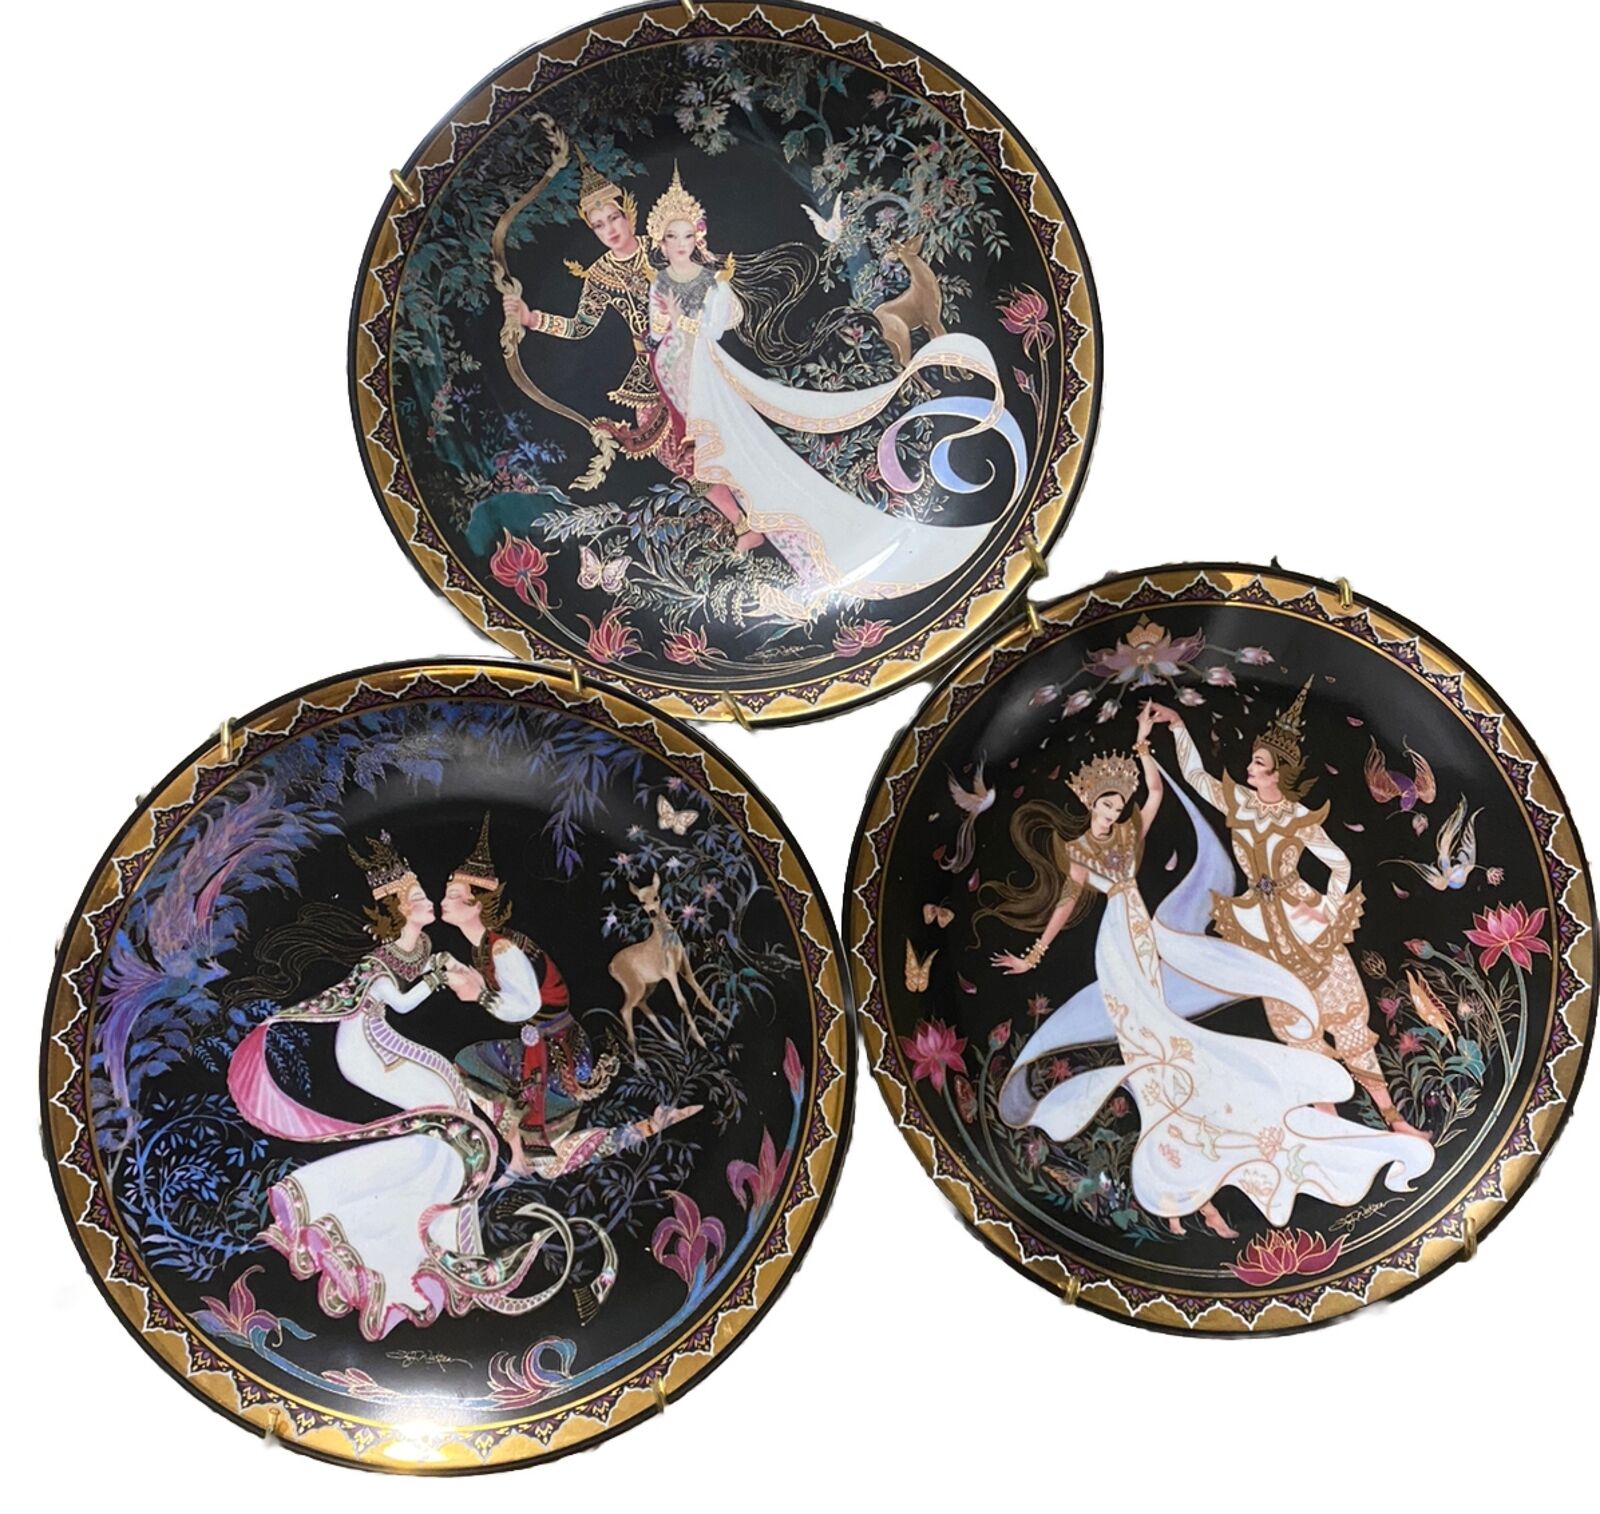 Lot of 3: Royal Porcelain Kingdom of Thailand Hand-Painted Collector's Plates